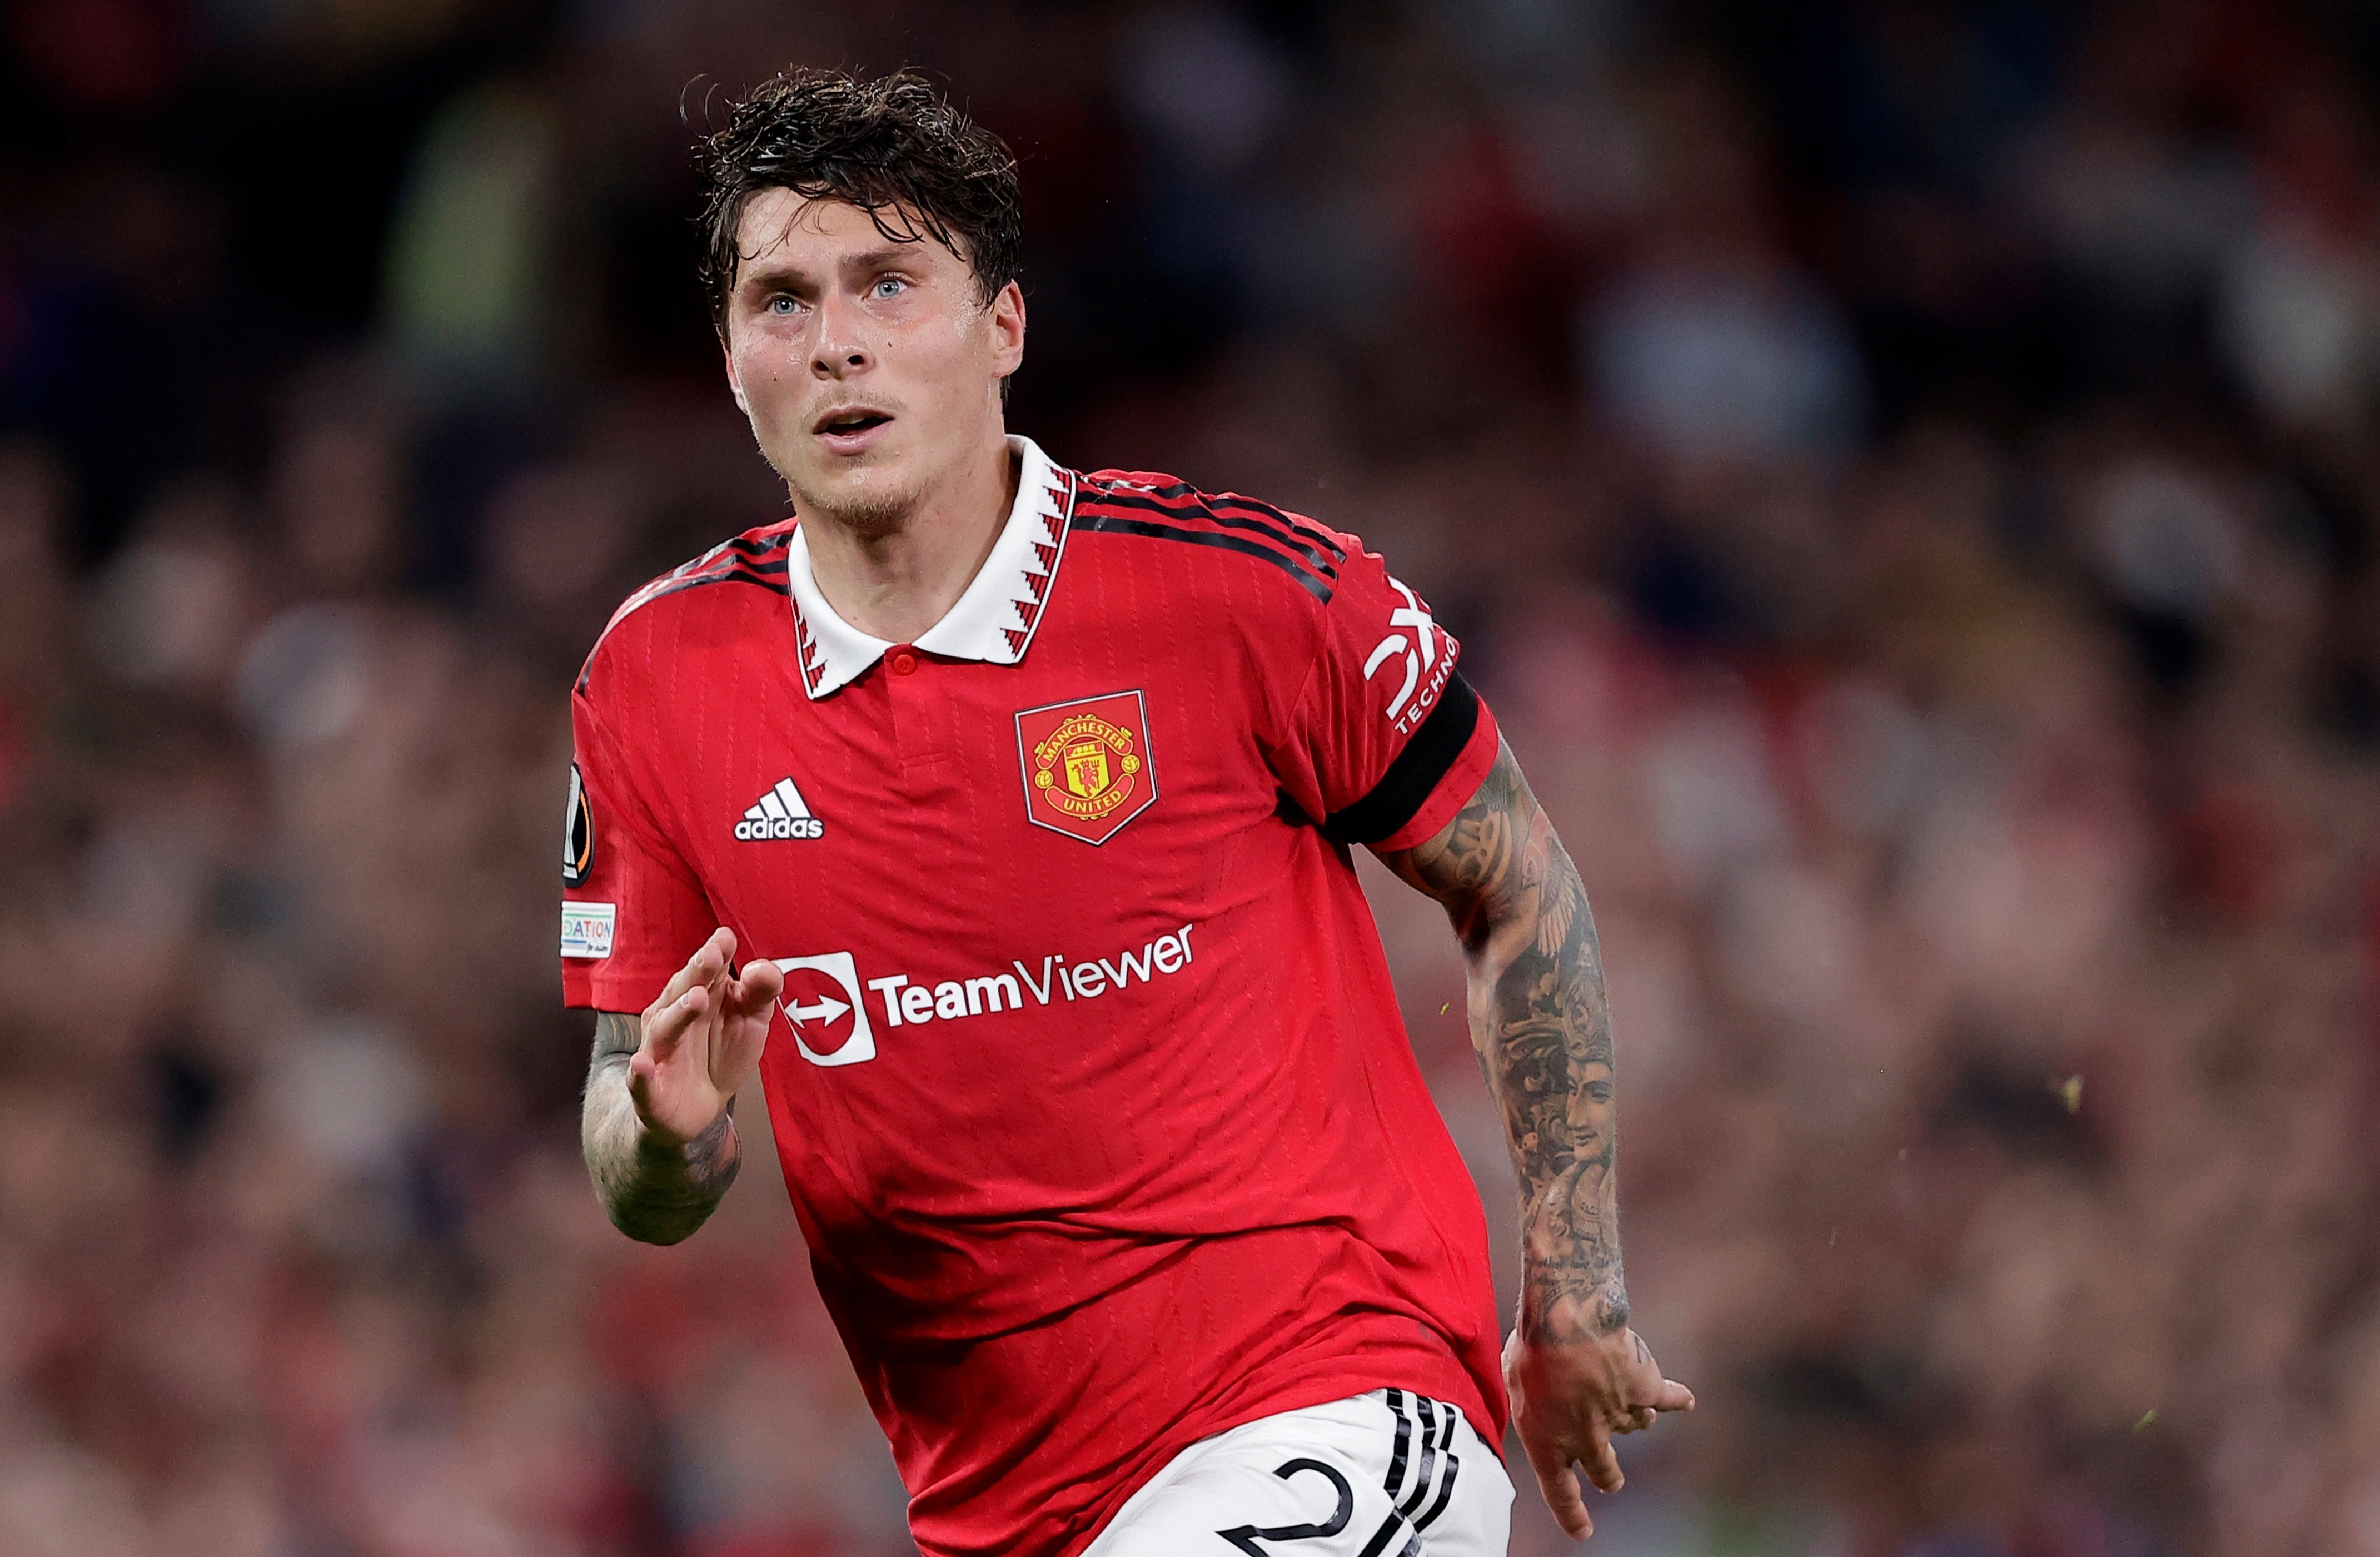 , Man Utd in defensive injury crisis ahead of Premier League return with just ONE fit first-team centre-back